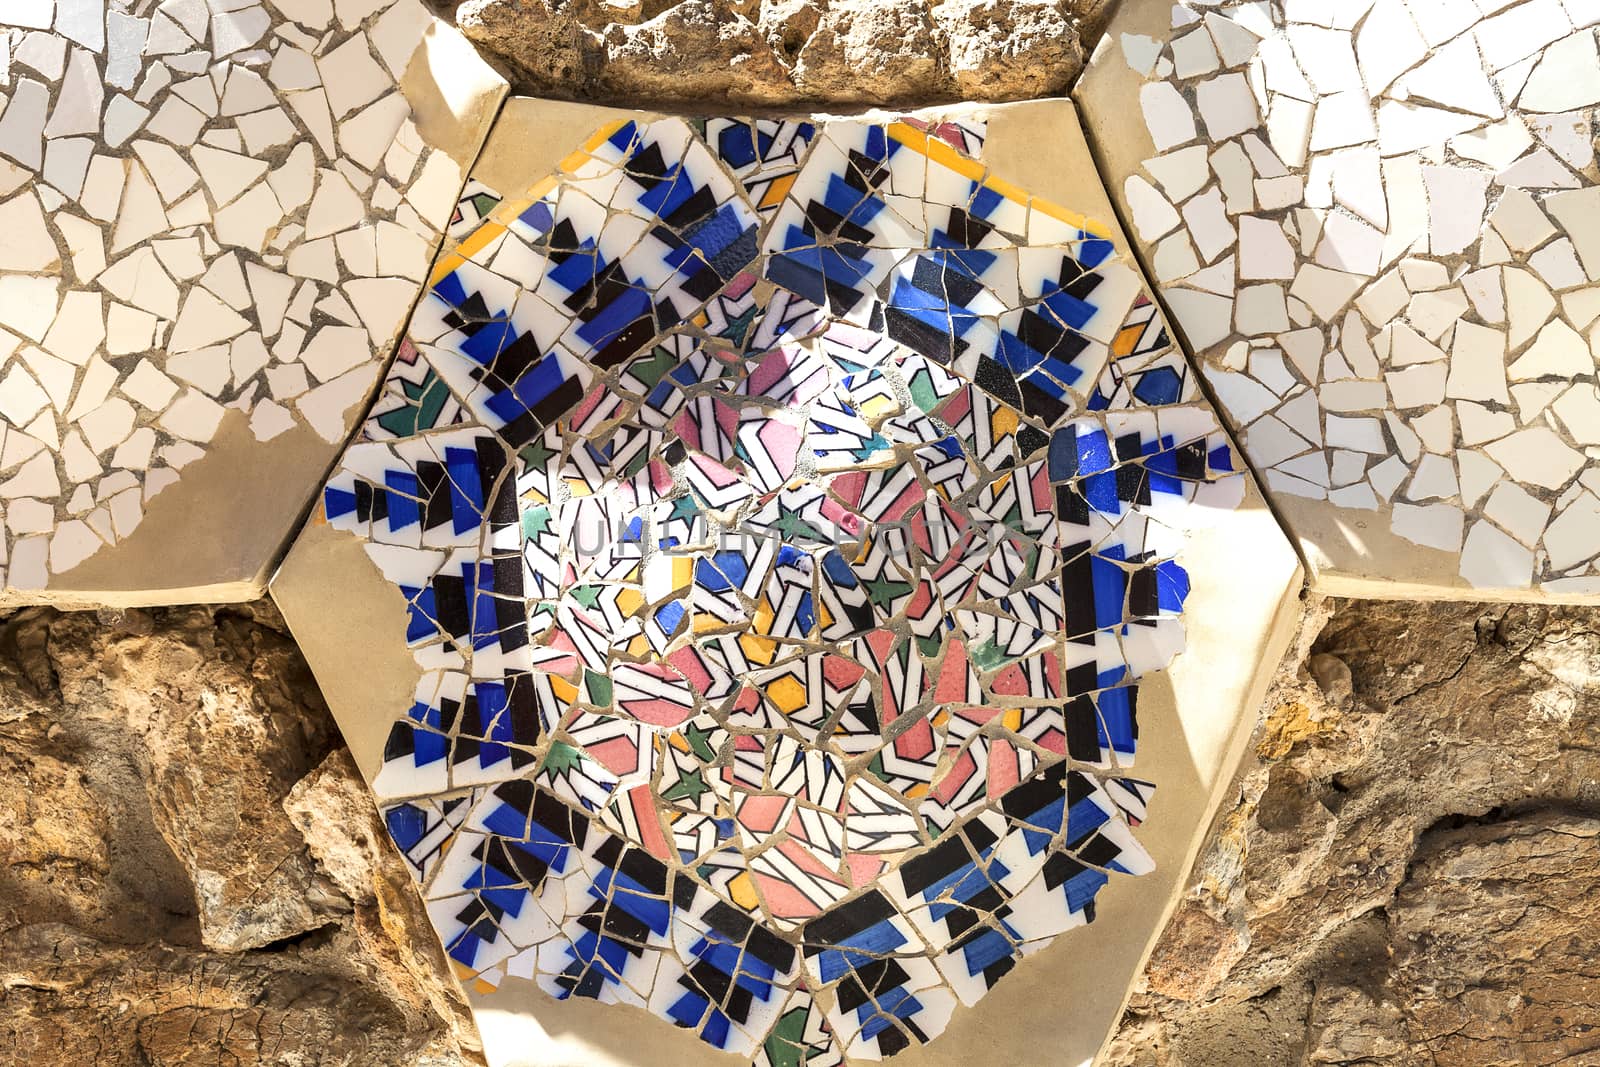 BARCELONA , SPAIN - MAY 13, 2016 : Mosaic in the garden of Gaudi House Museum. Building  located near the Park Guell  in Barcelona was the residence of Antoni Gaudi for almost 20 years, from 1906 to 1925.